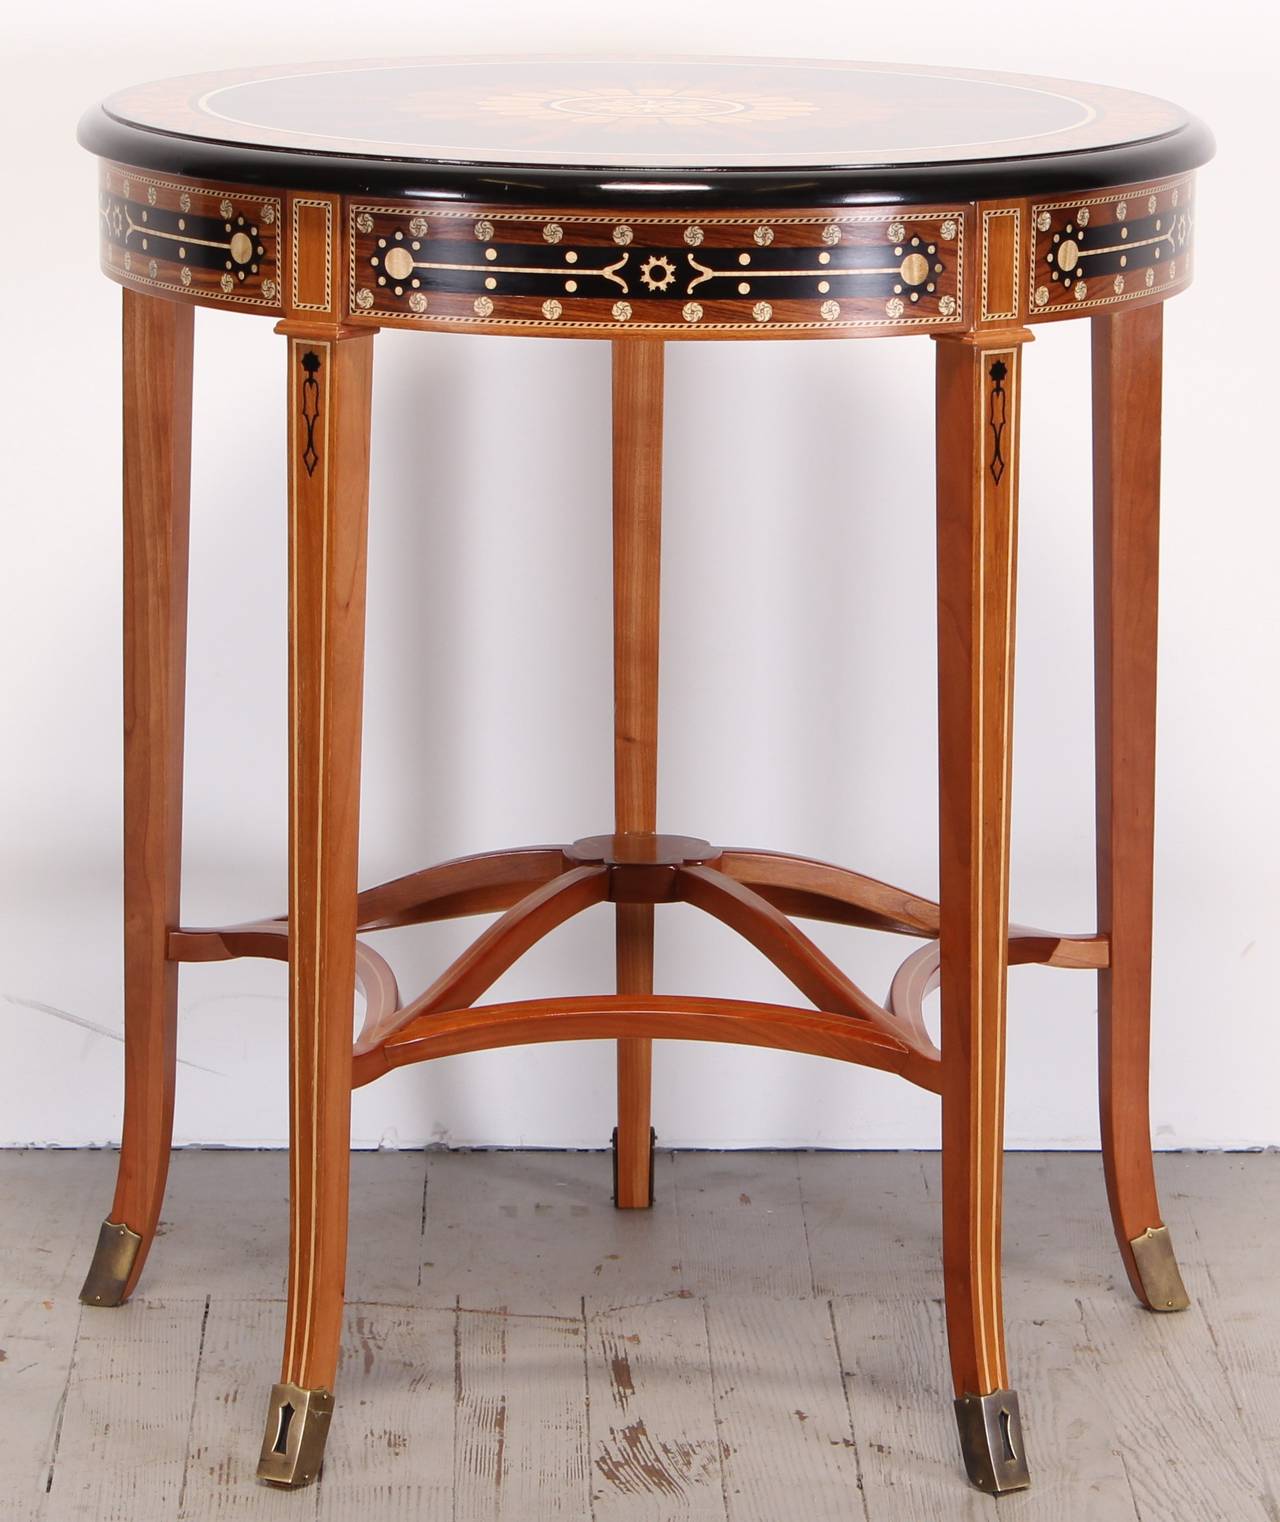 The top of this elegant occasional table is inspired by 5th century Indian printed textiles. The radiant inlay pattern is a study in exotic native Indian woods. Satinwood, Indian rosewood and Macassar ebony are combined
to form a lotus petal